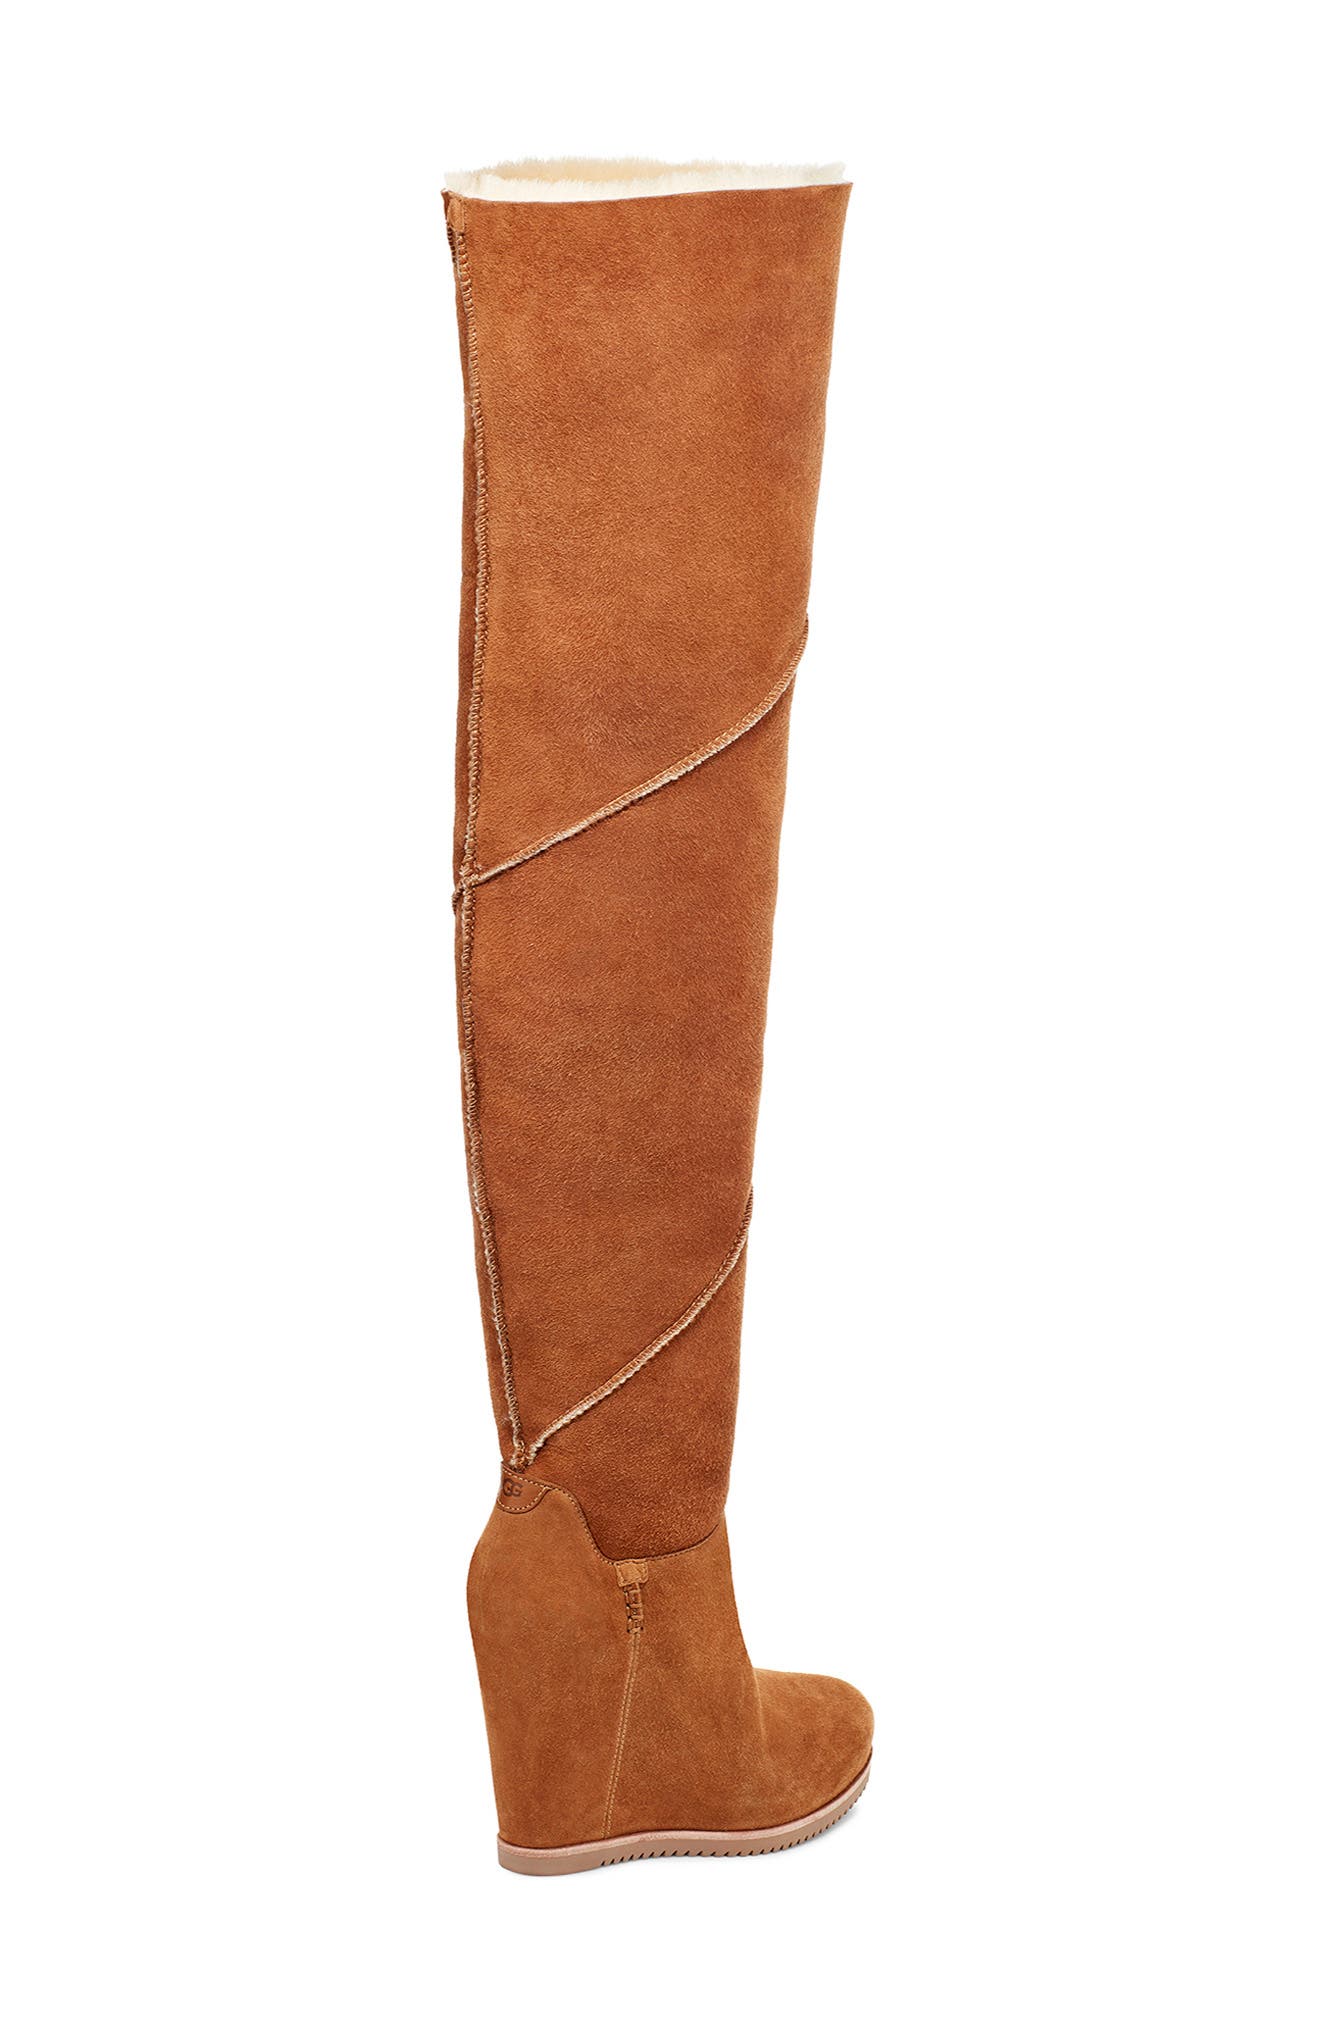 ugg wedge high shaft suede boots